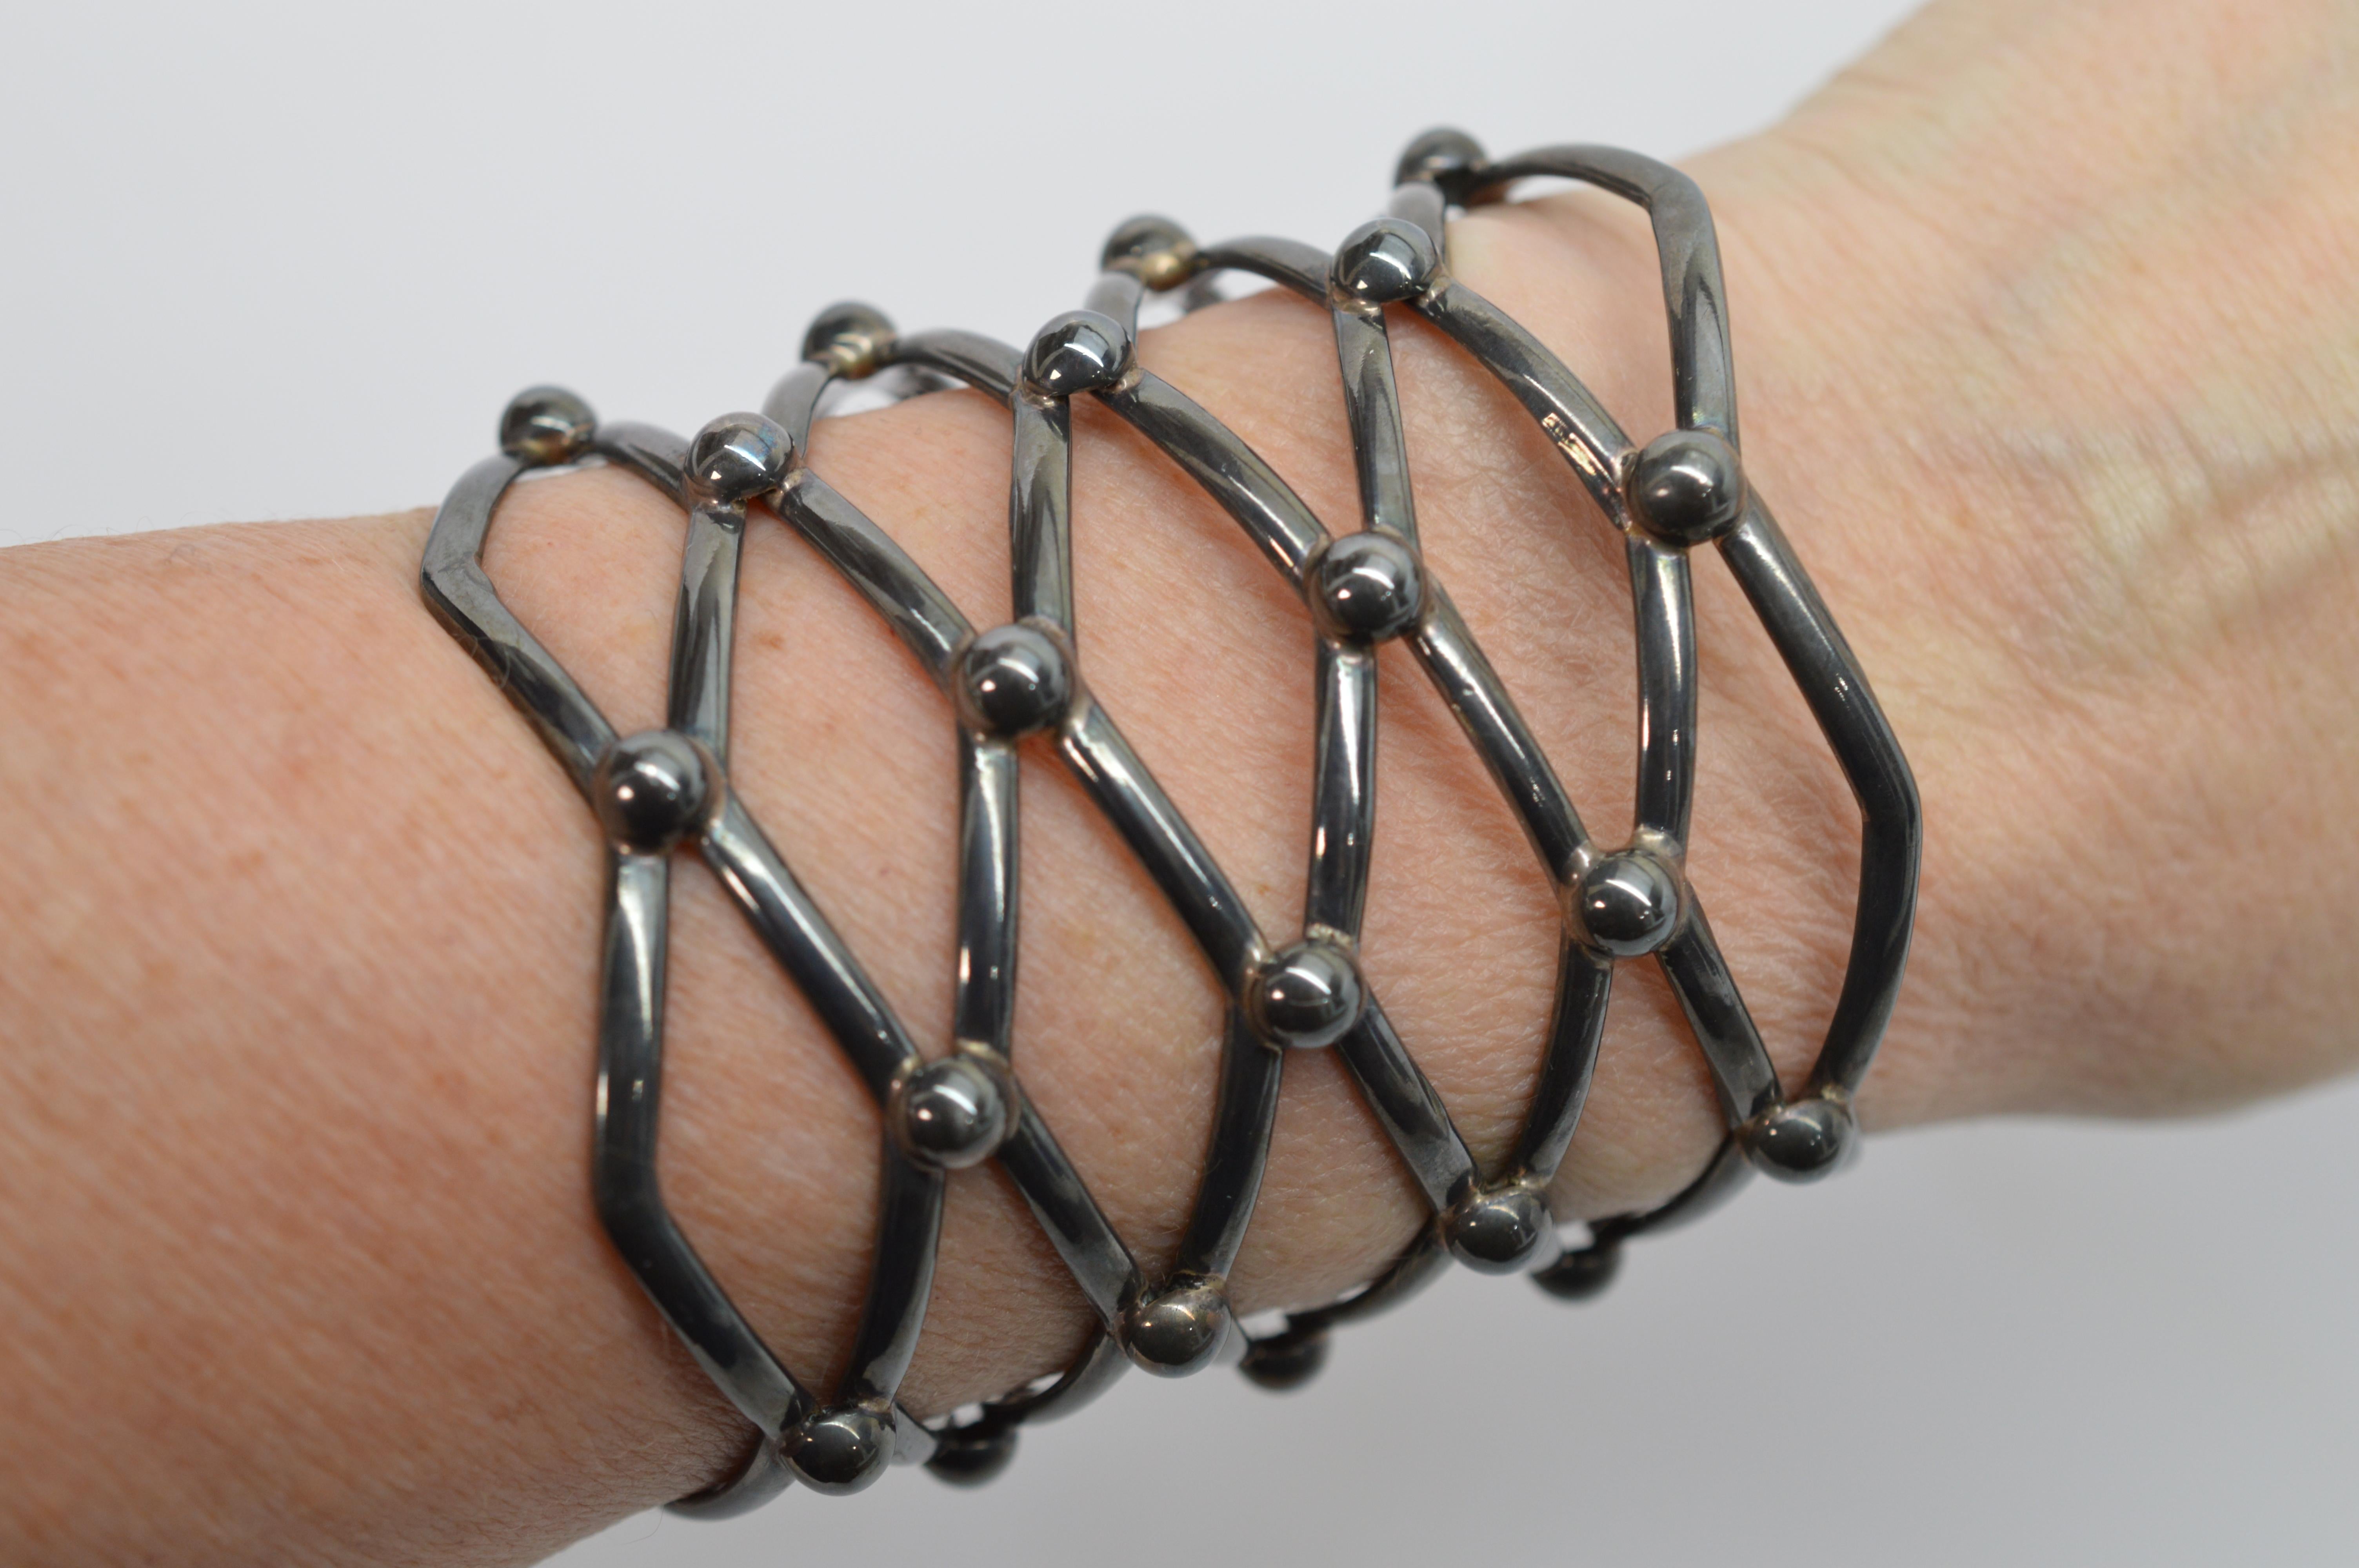 Bold in style this large, archer's wrist length lattice weave silver cuff bracelet makes a defined style statement. Artisan created, this piece measures 2-7/8 inch long and 2-3/8 wide, with an approximate 6-3/4 inch circumference. Somewhat rigid in